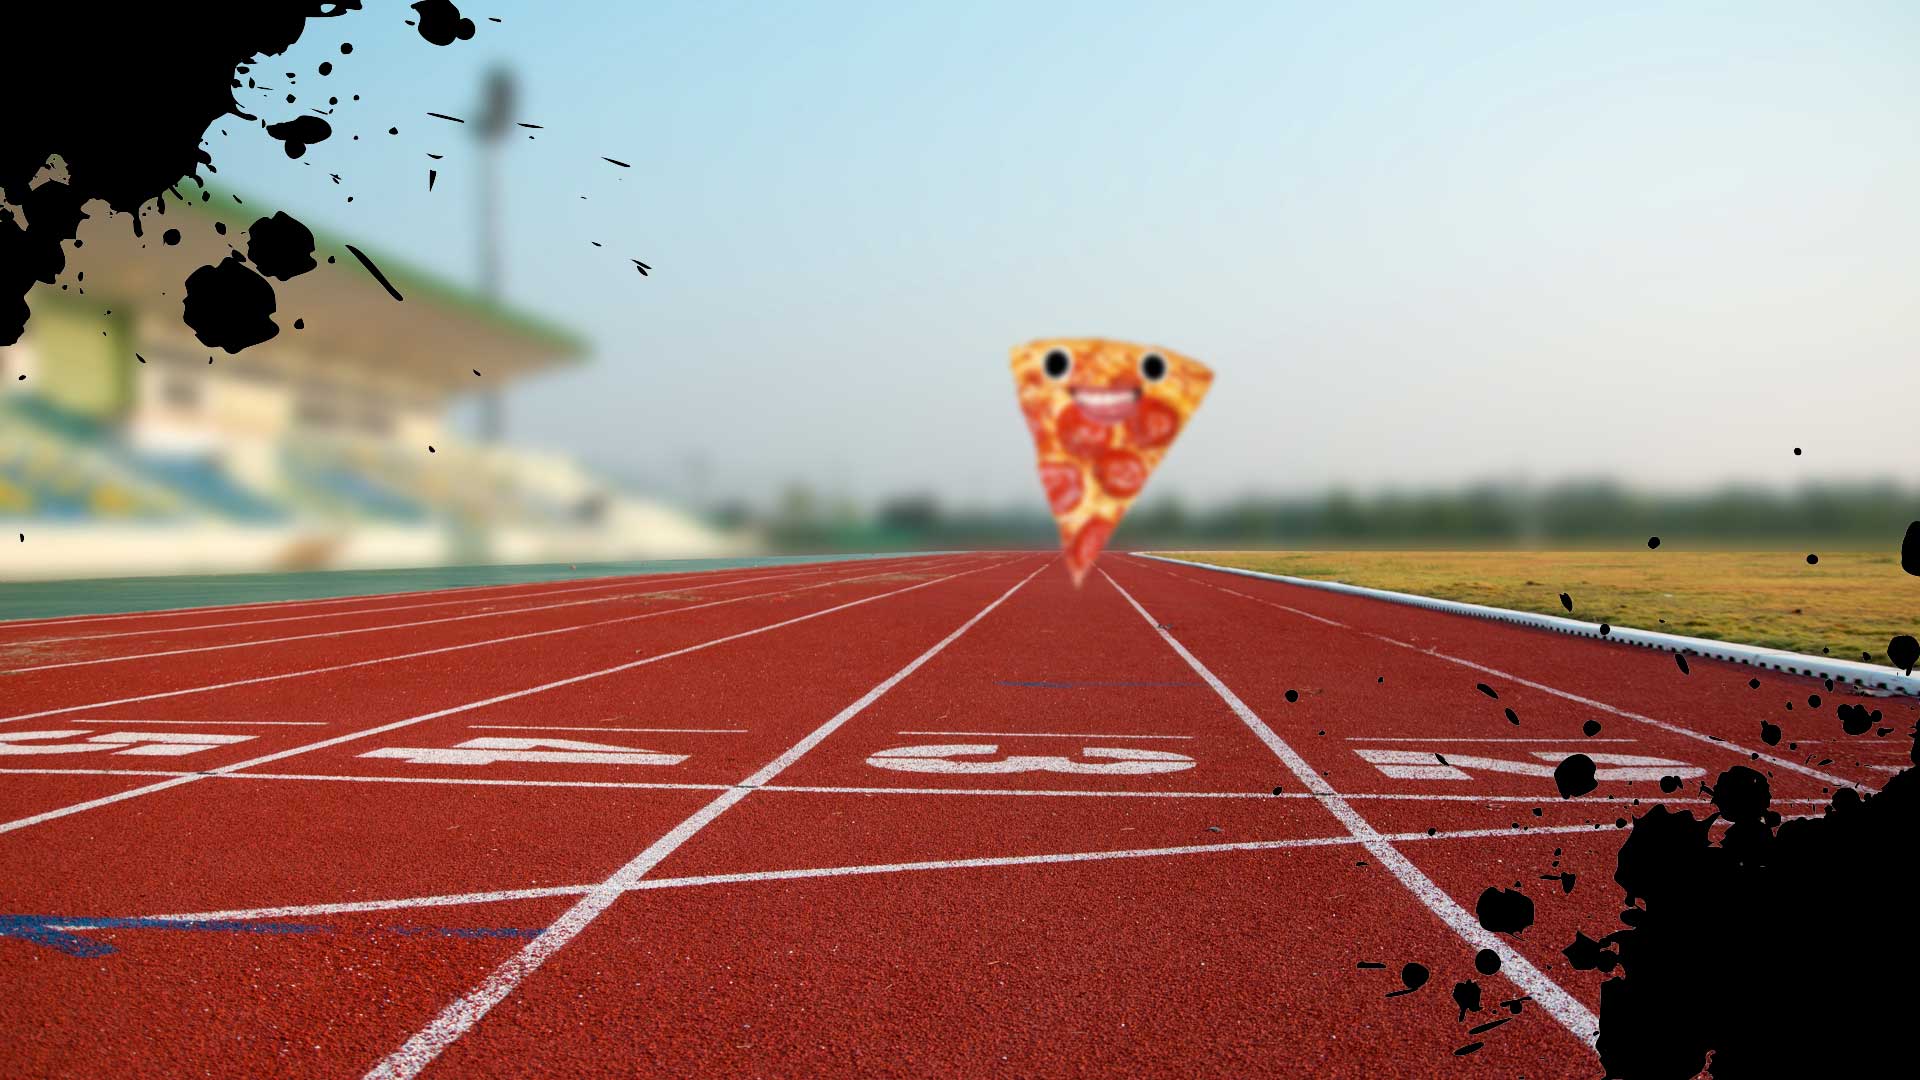 A slice of pizza running on an athletics track